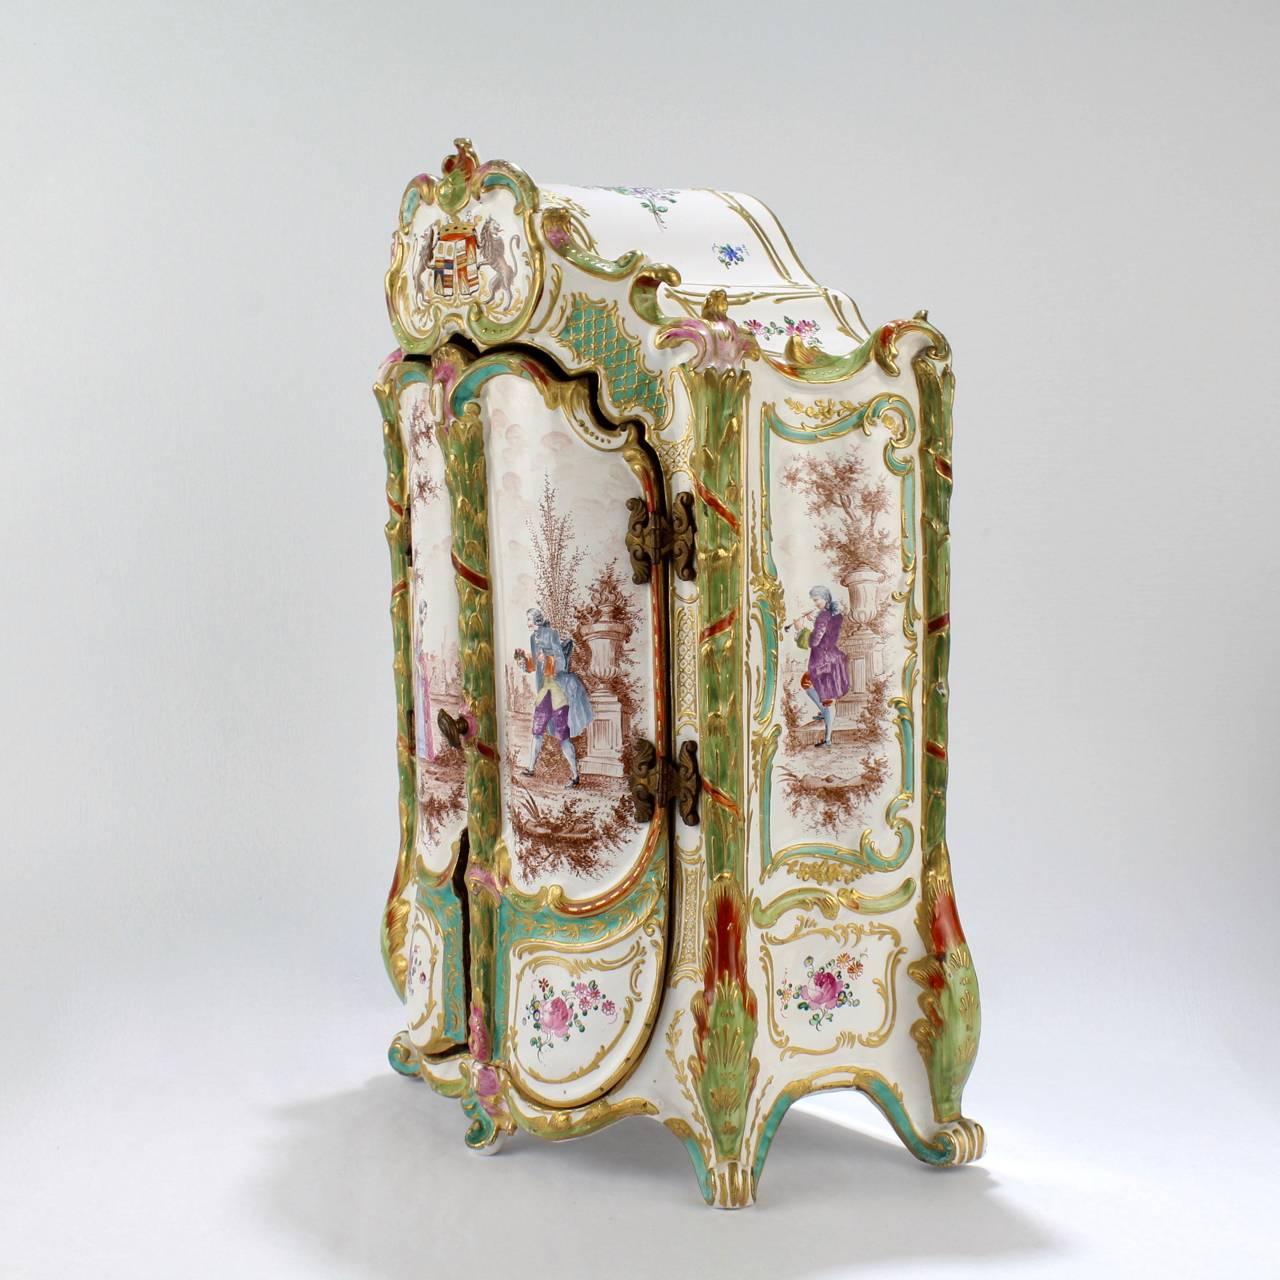 Antique Marseille French Faience Pottery Miniature Armoire or Jewelry Casket 1